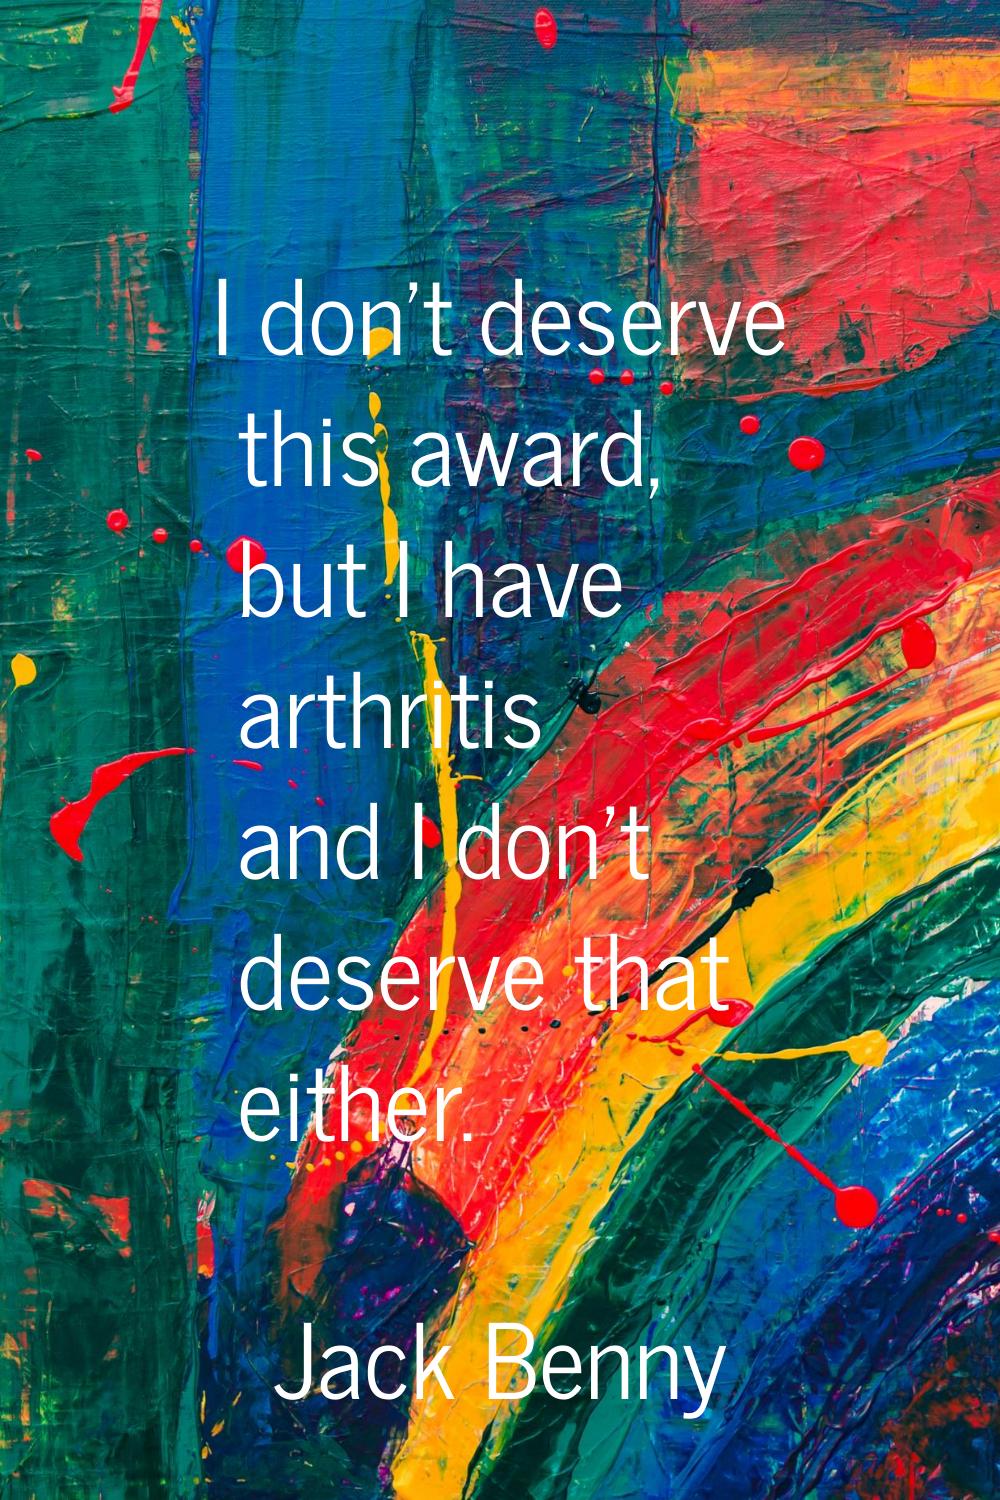 I don't deserve this award, but I have arthritis and I don't deserve that either.